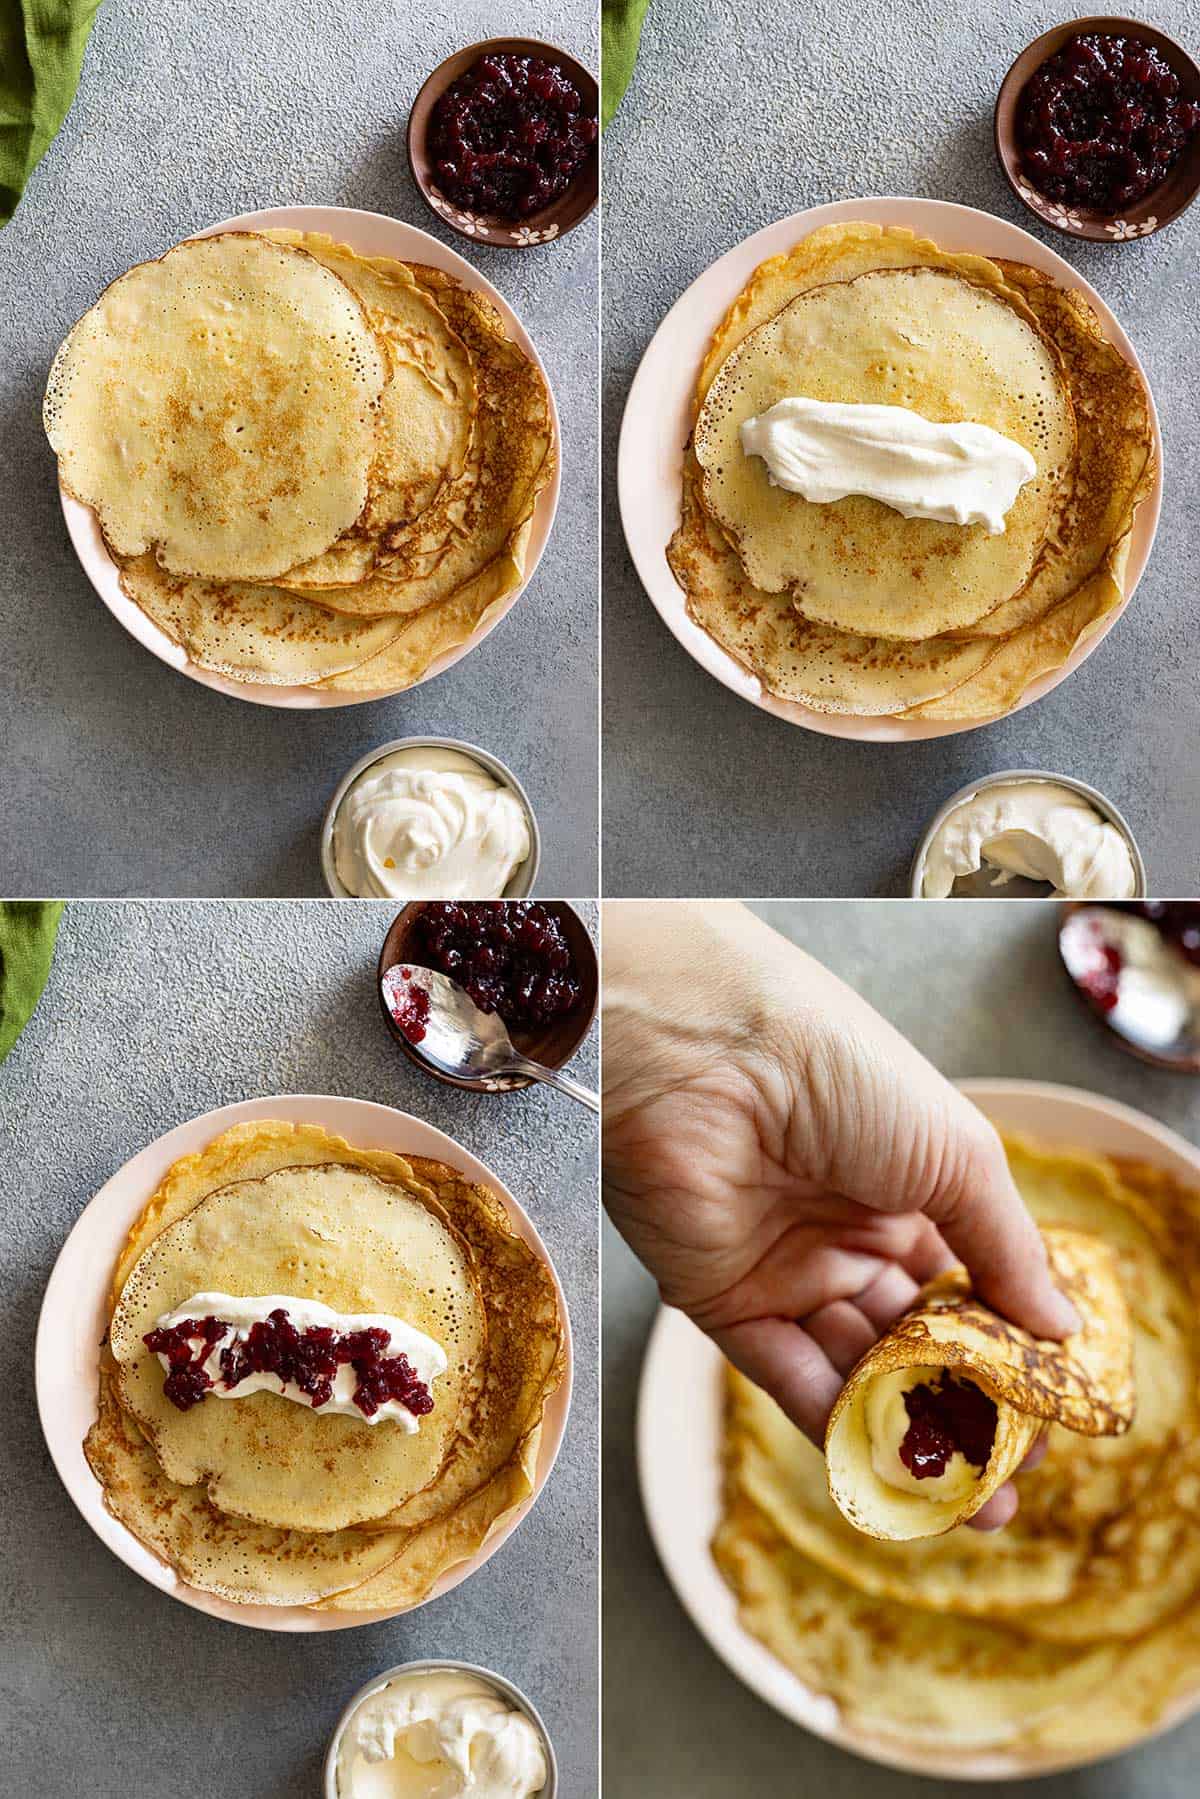 Four pictures showing a plate of pancakes fresh of the griddle, whipped cream down the center, lingonberries down the center, and a hand holding one rolled up. 